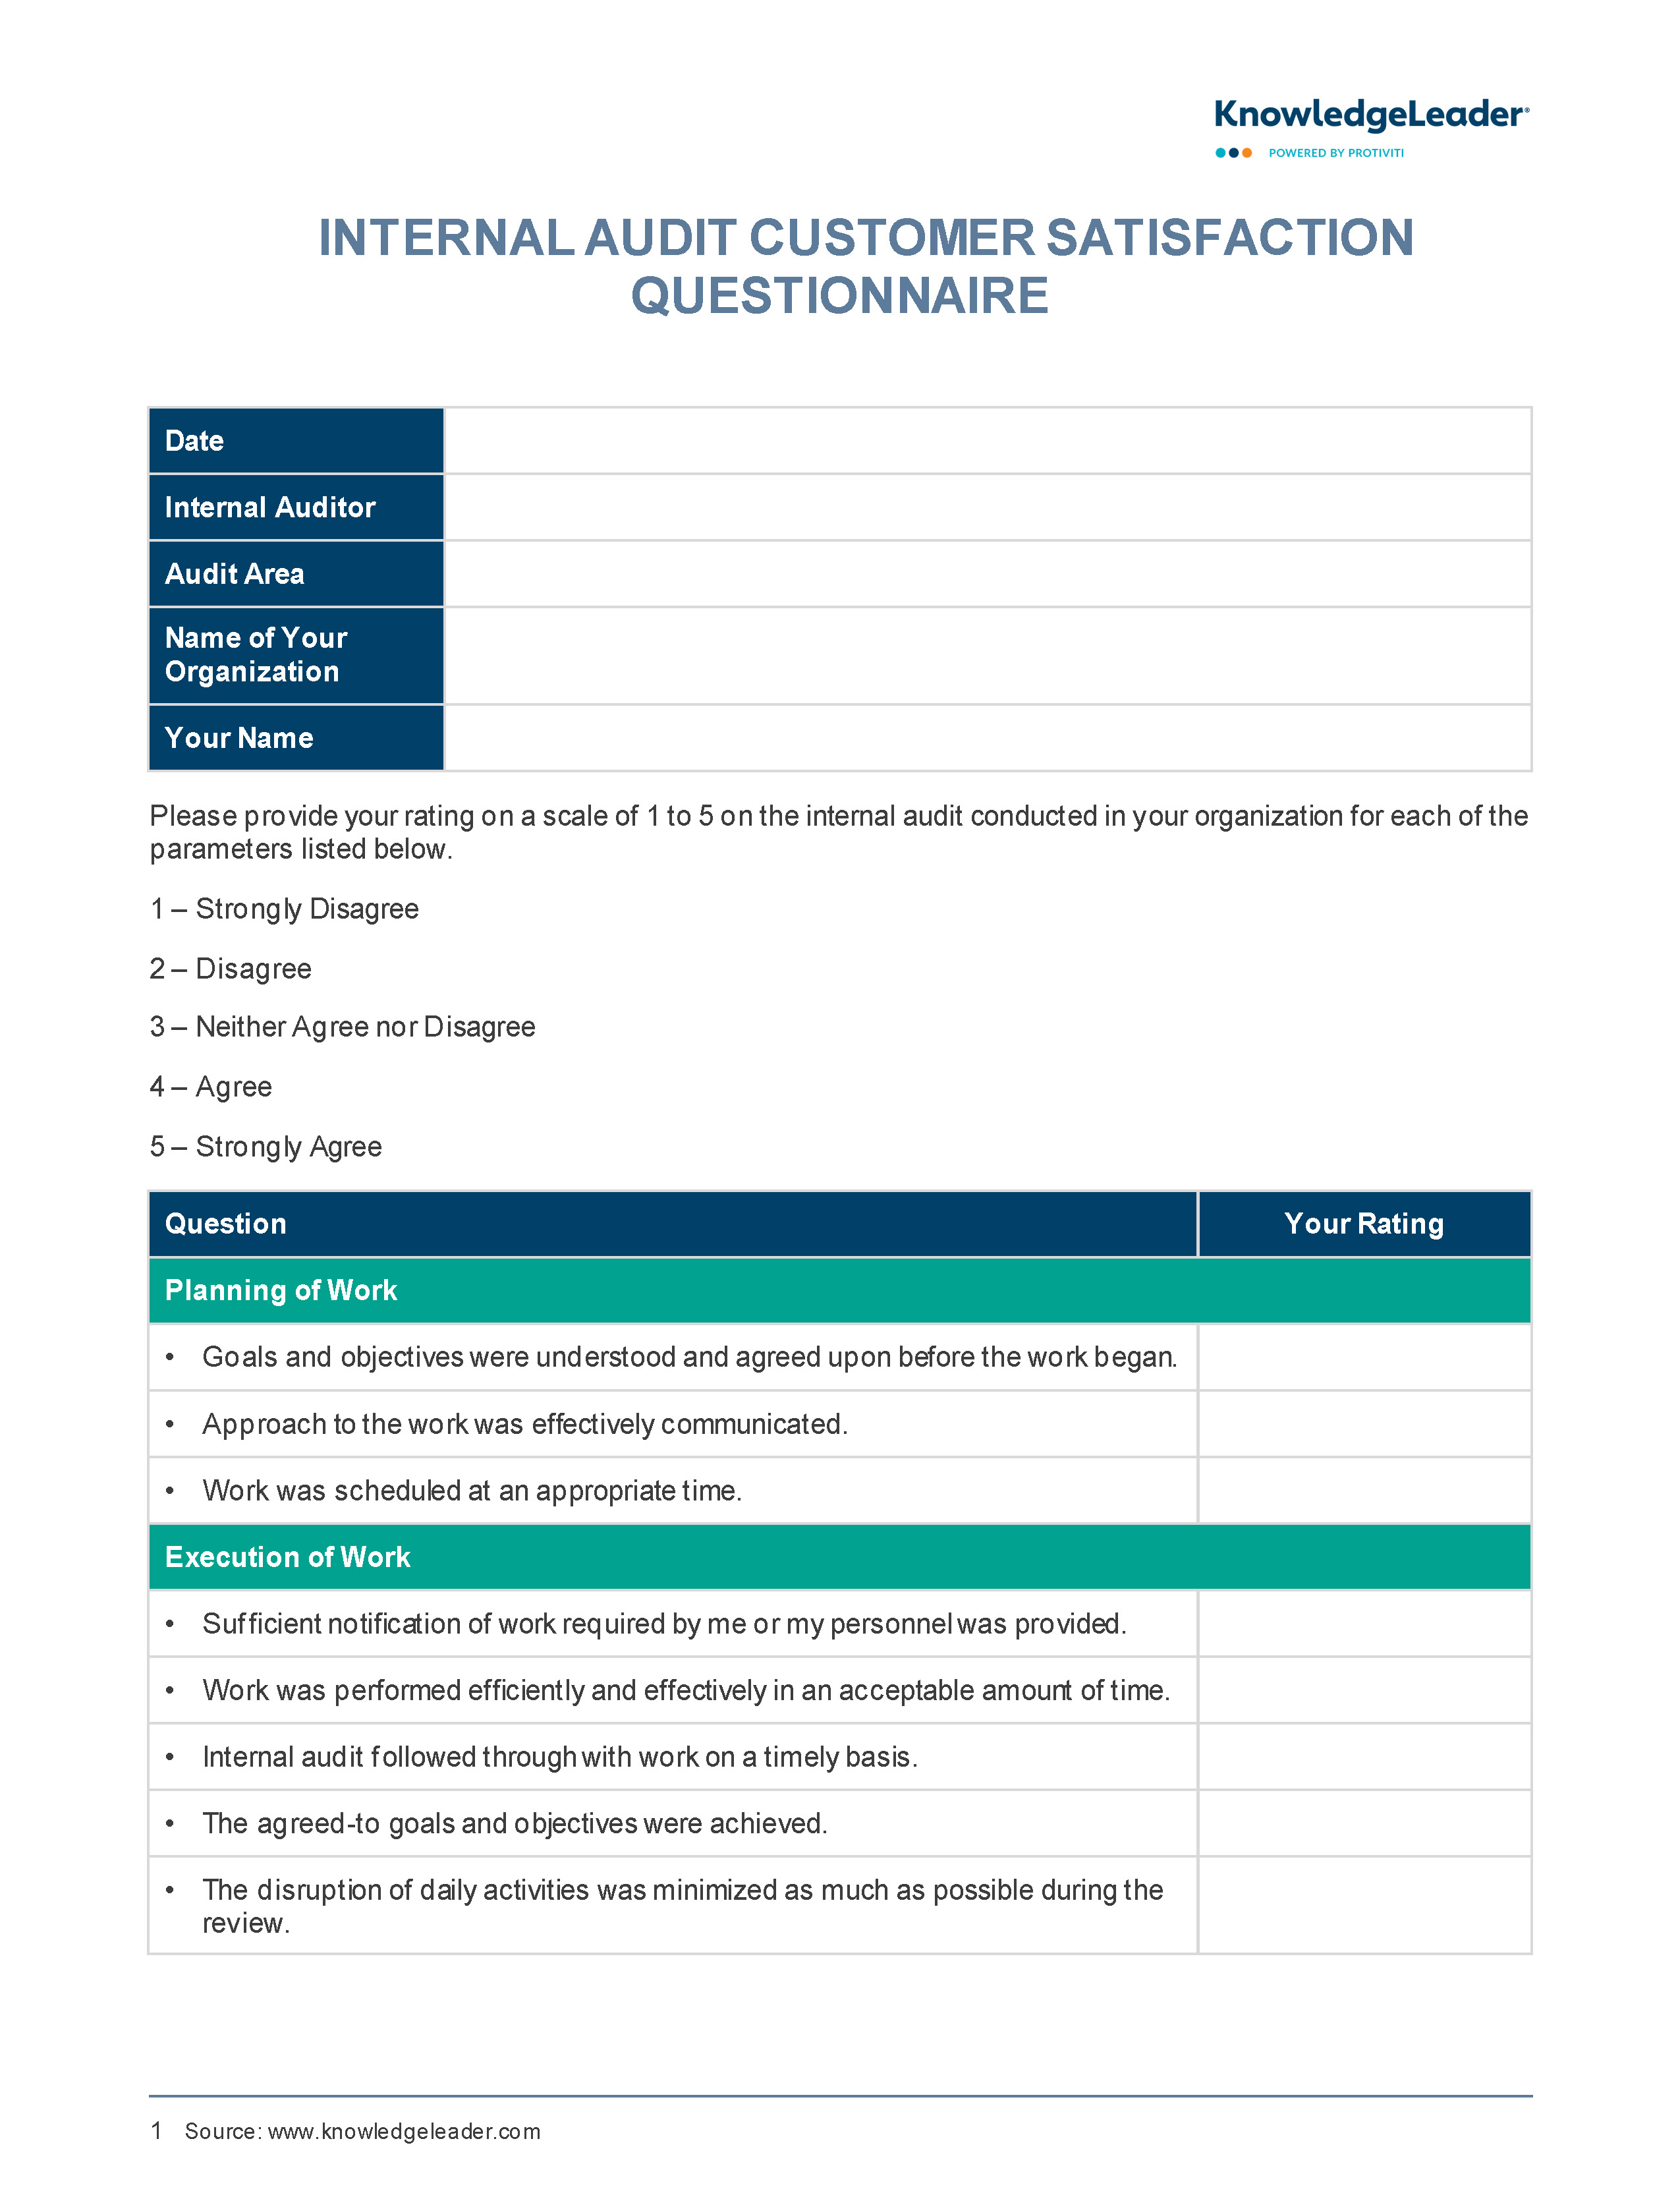 Screenshot of the first page of Internal Audit Customer Satisfaction Questionnaire